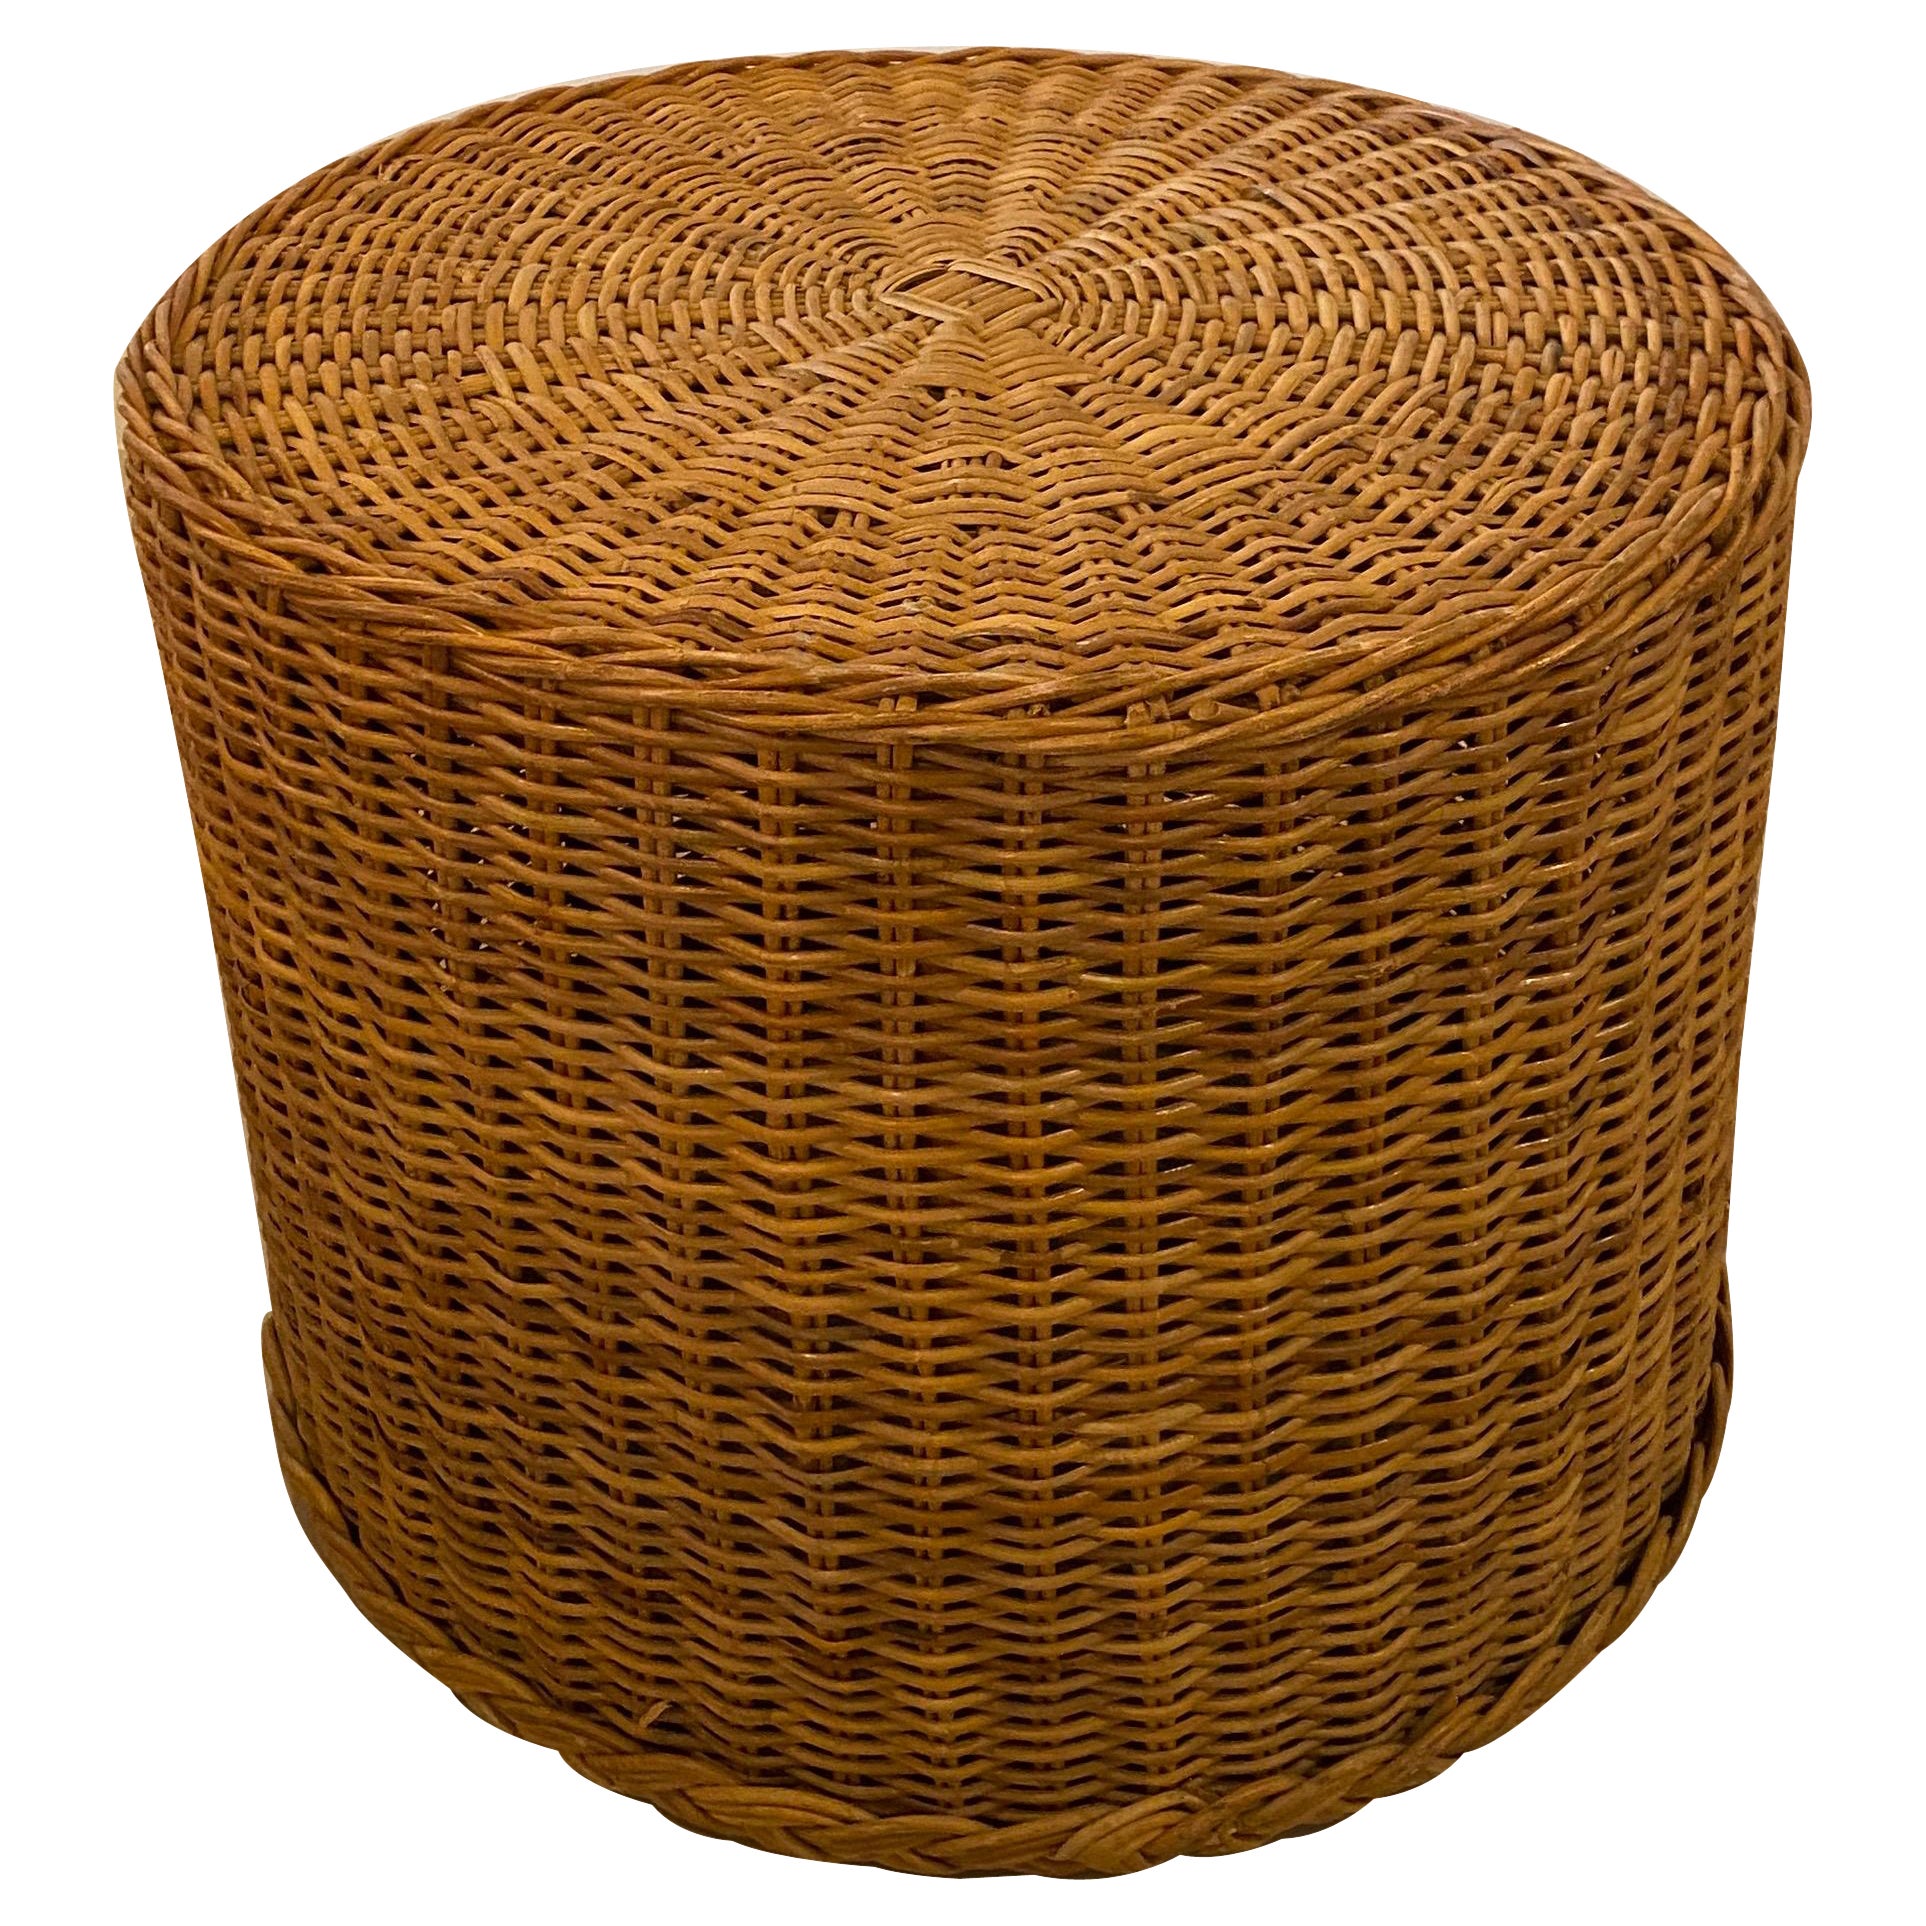 Vintage Wicker Works Round Braided Wicker Side End Table